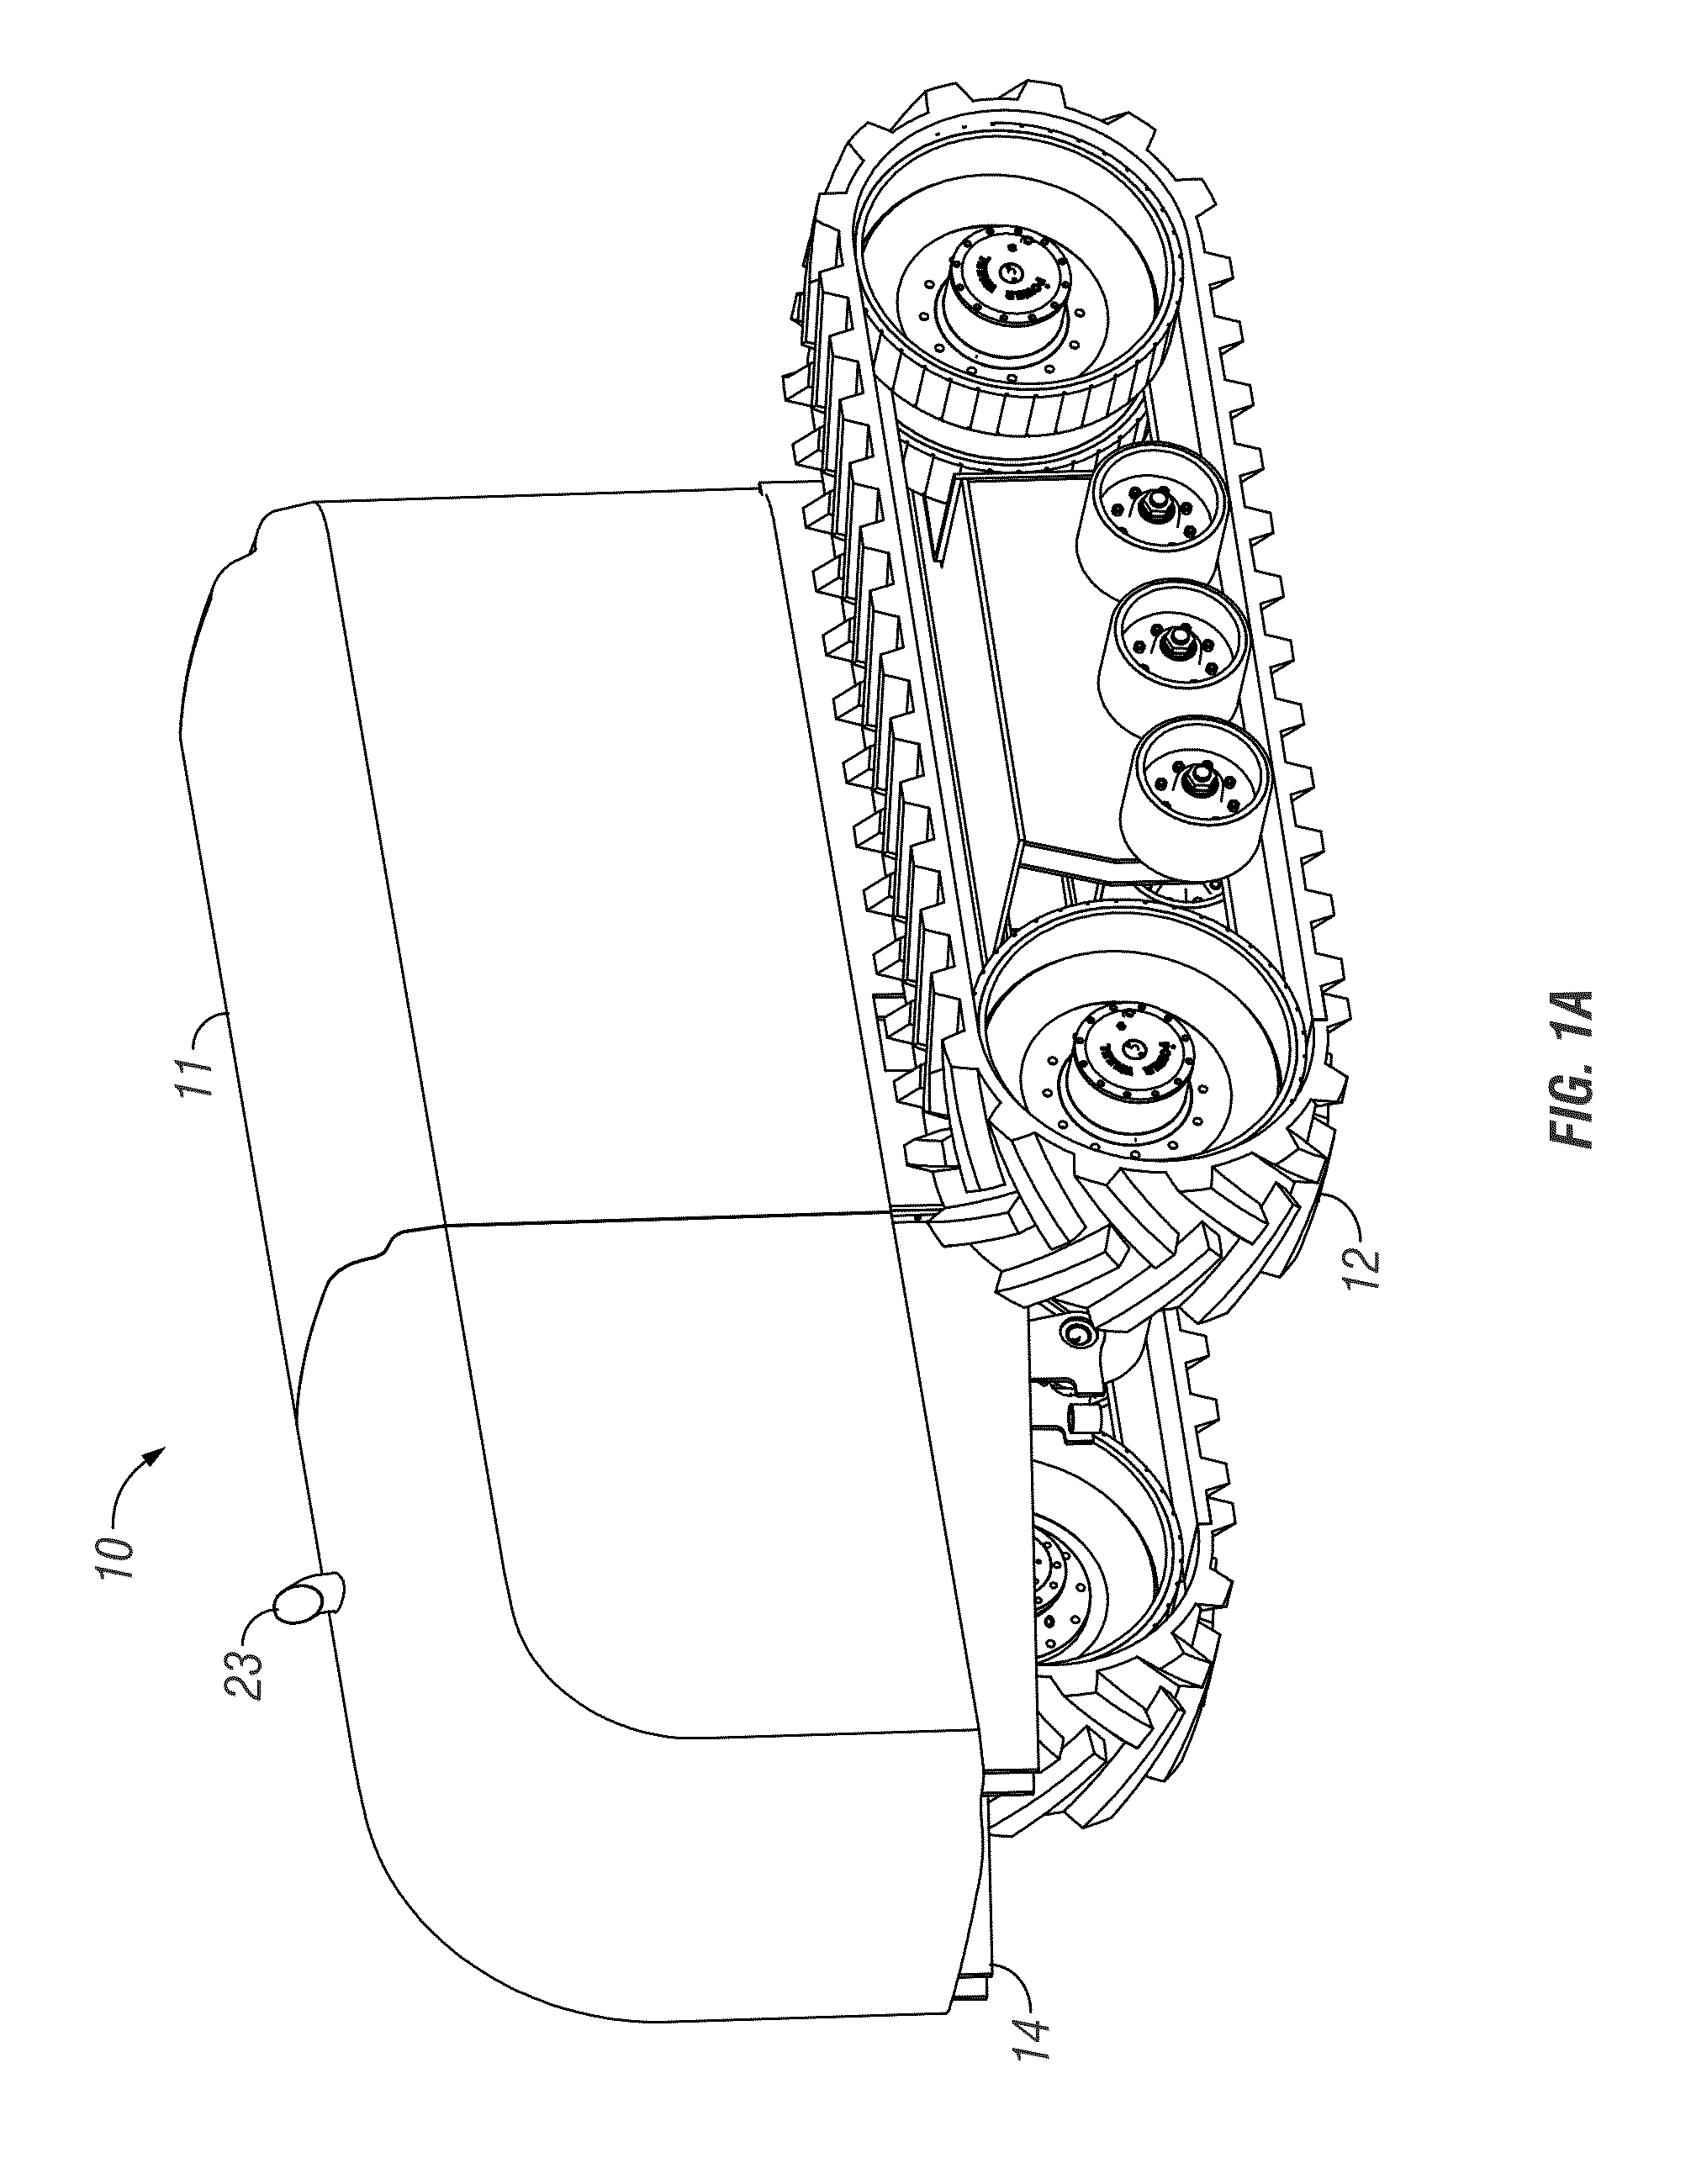 Autonomous systems, methods, and apparatus for ag based operations